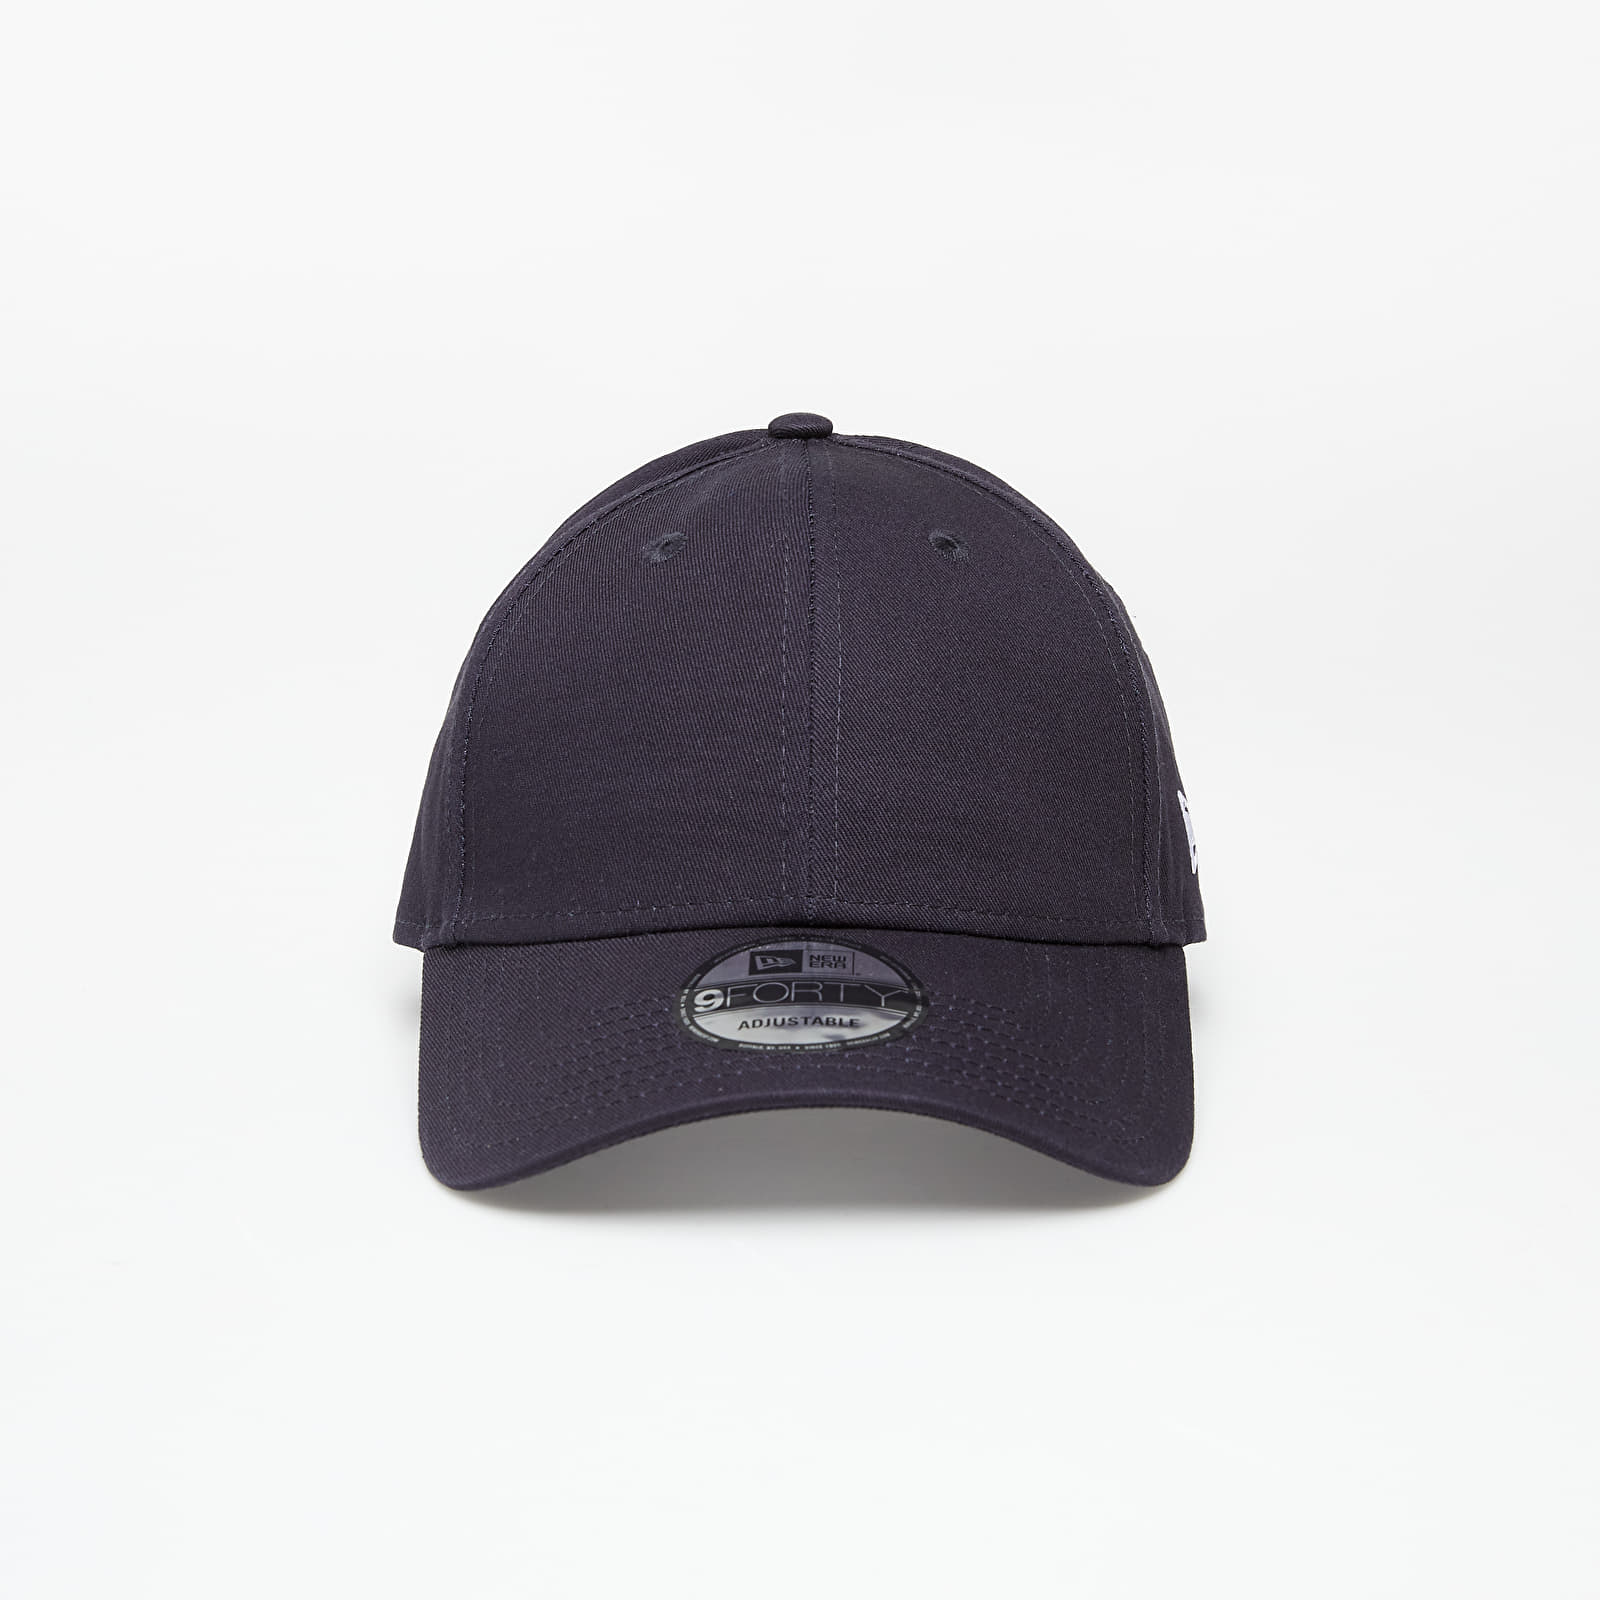 Caps New Era Cap 9Forty Flag Collection Navy/ White